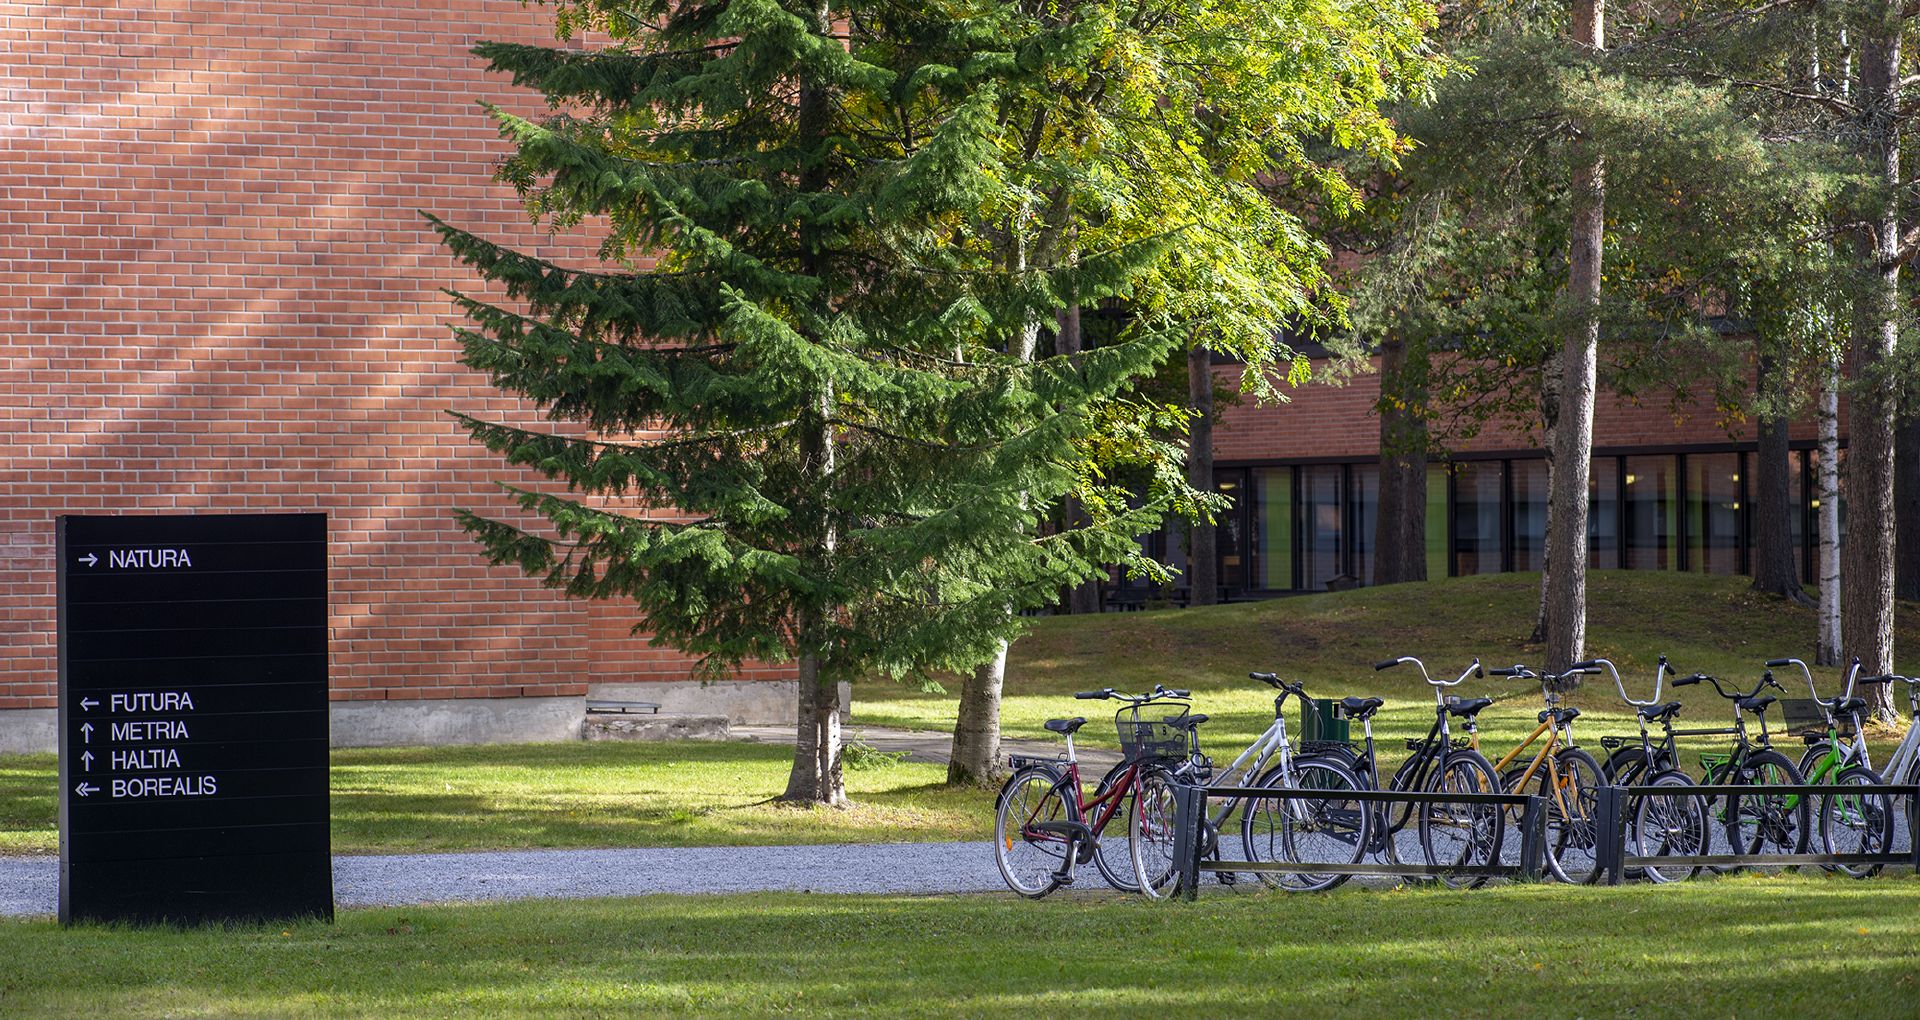 University of Eastern Finland published a comprehensive report on sustainability